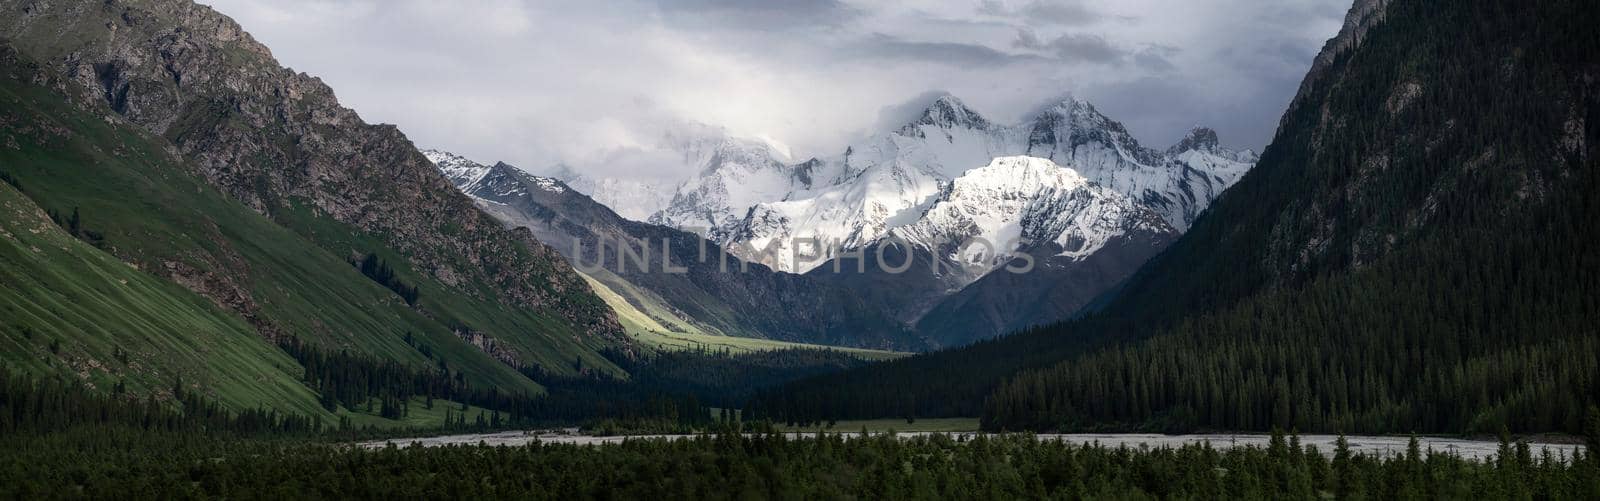 Snowy mountains and trees in a cloudy day. Khan Tengri Mountain In Xinjiang, China. by vinkfan